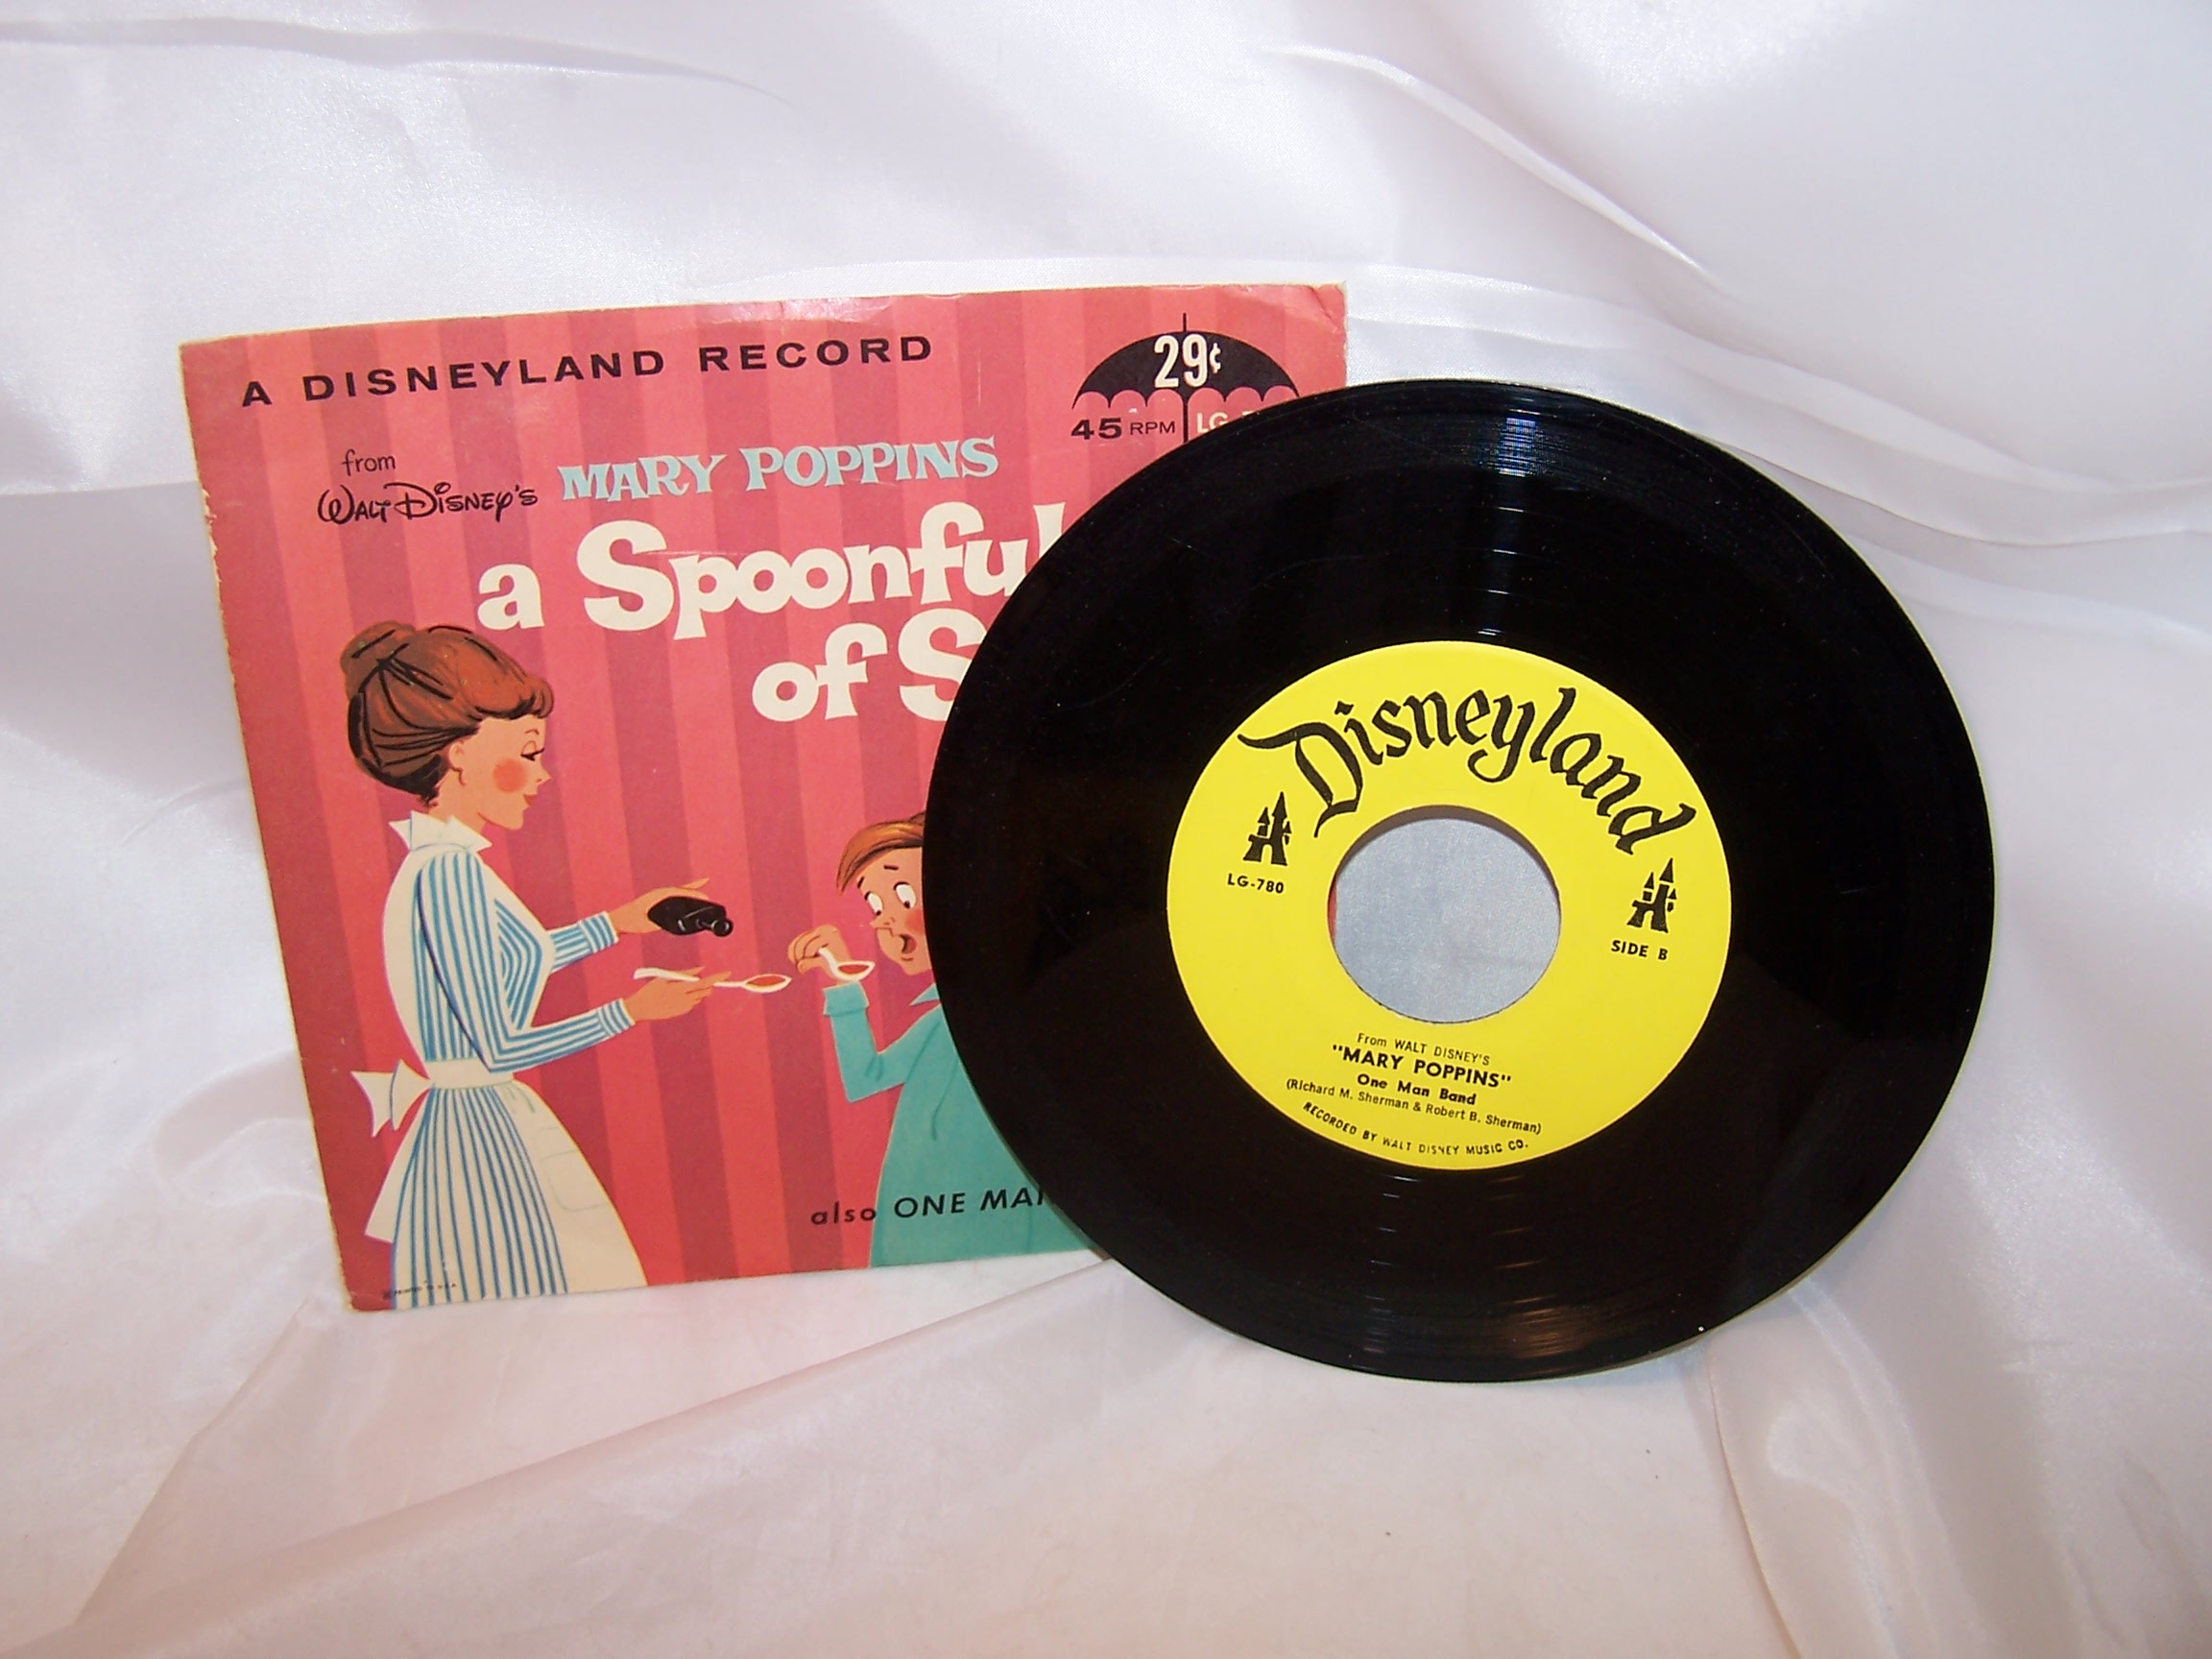 Image 2 of Mary Poppins, A Spoonful of Sugar, 45 RPM Record, 1964